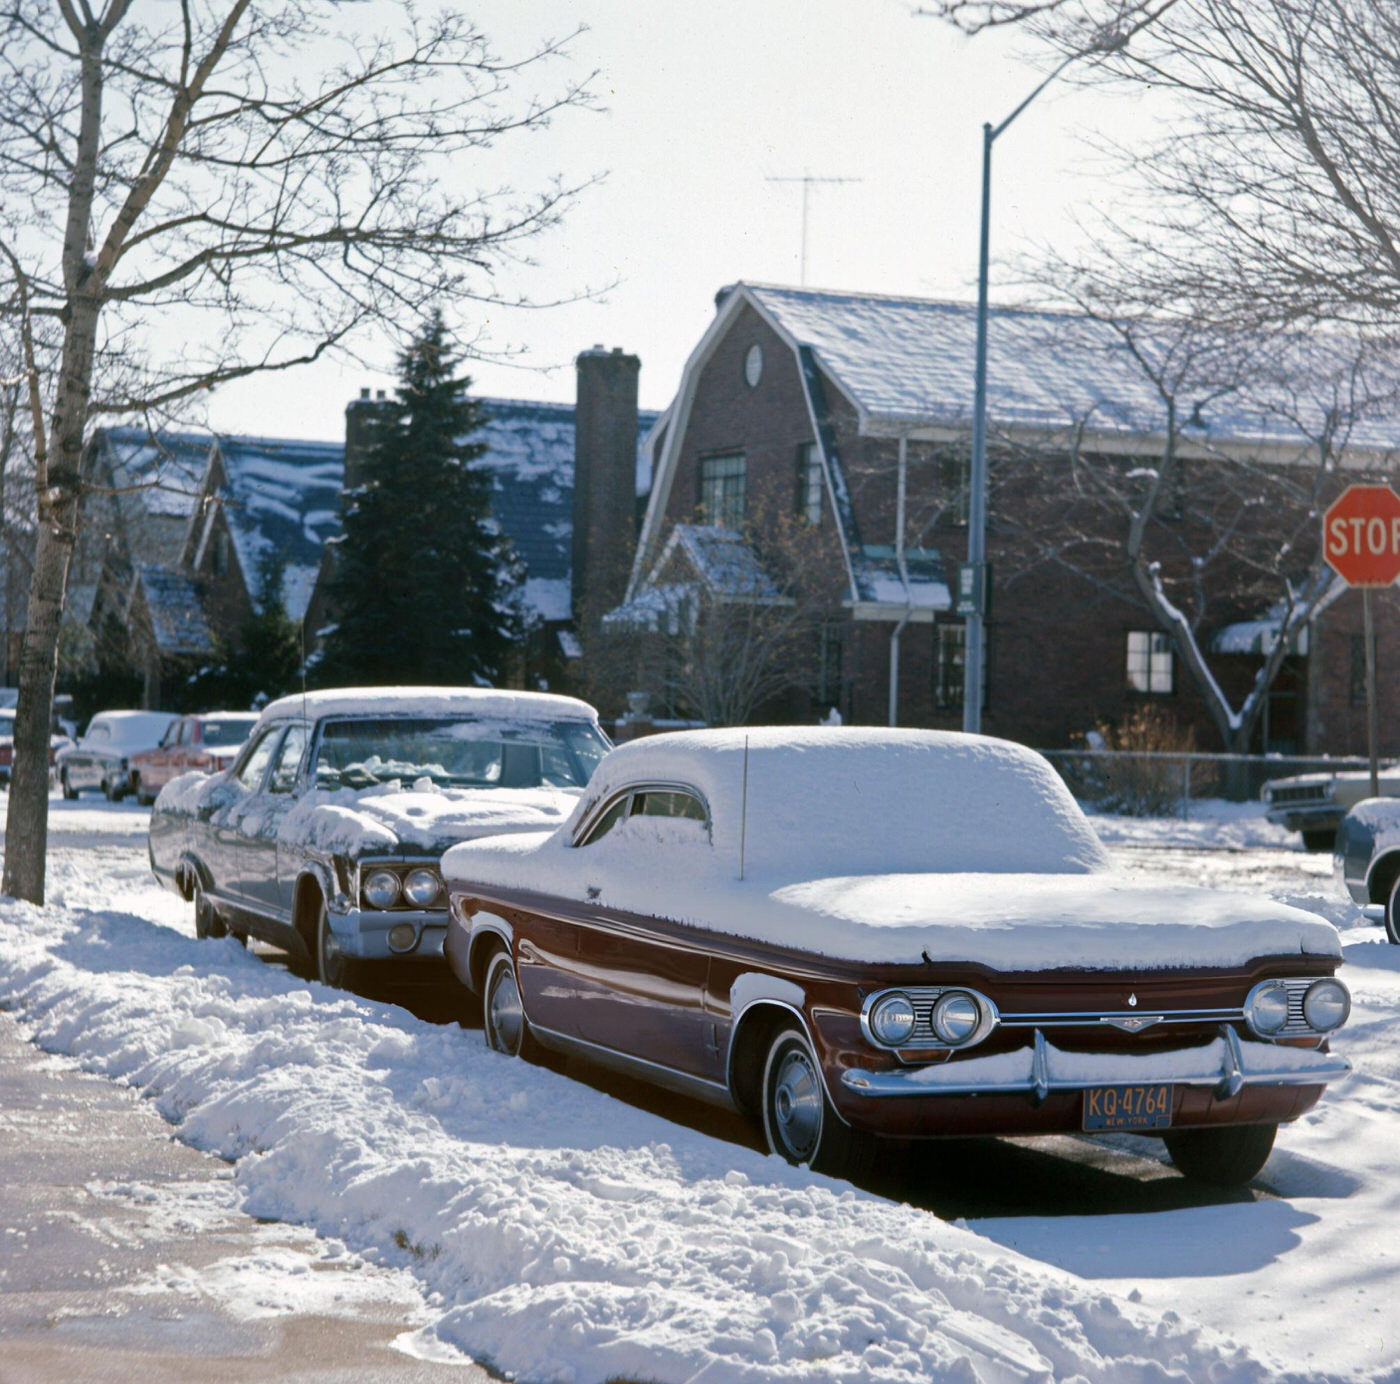 Snow-Covered Parked Cars Along The Horace Harding Expressway In Rego Park, Queens, 1967.